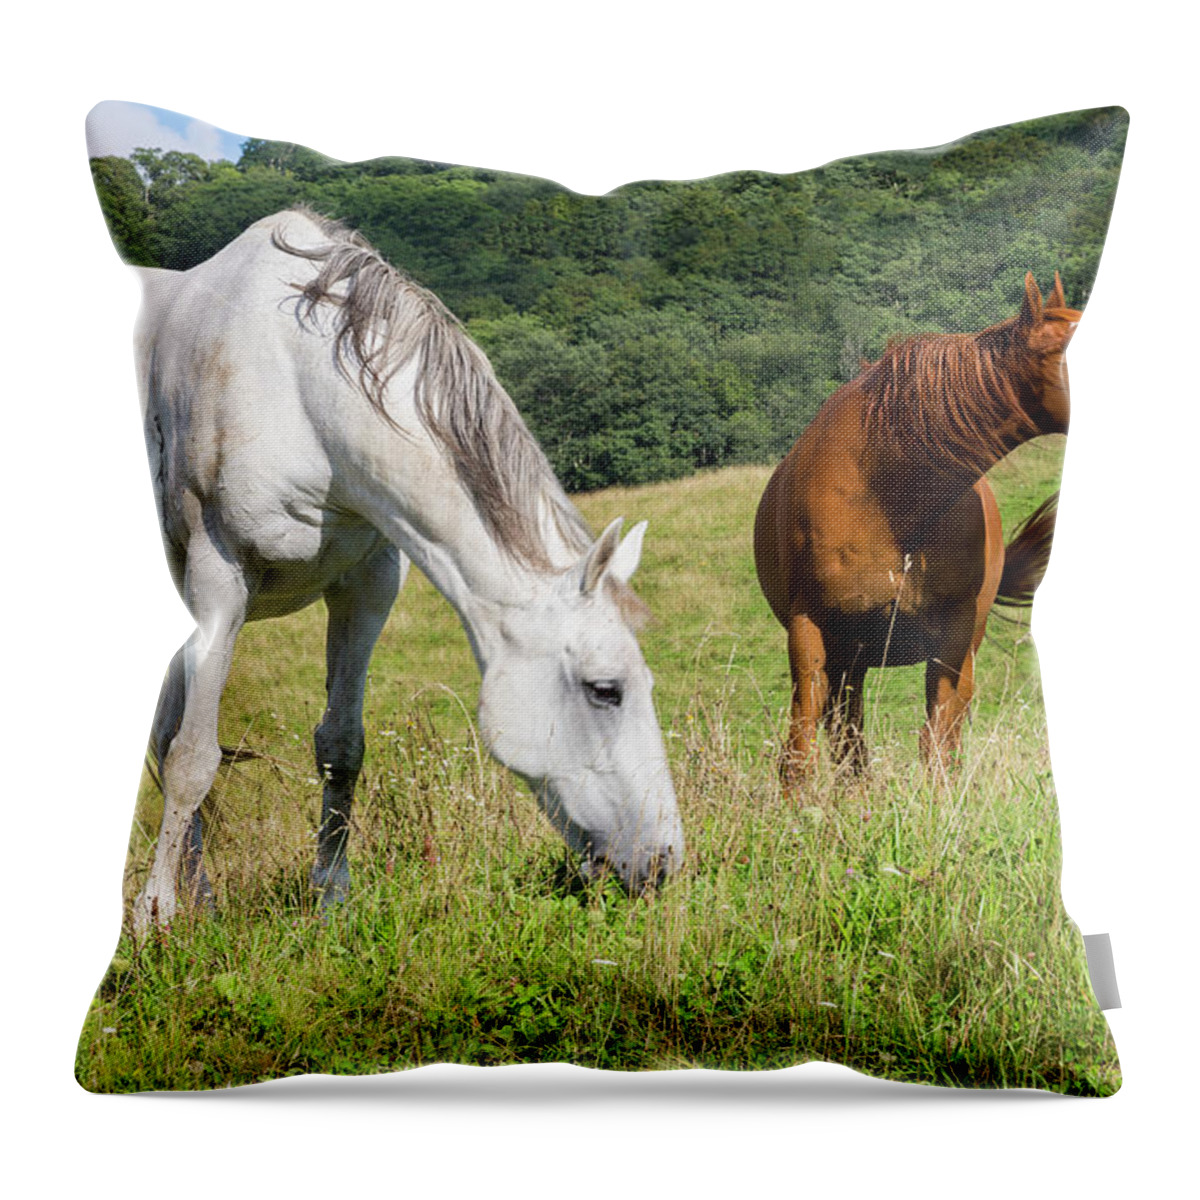 Horses Throw Pillow featuring the photograph Summer Evening For Horses by D K Wall